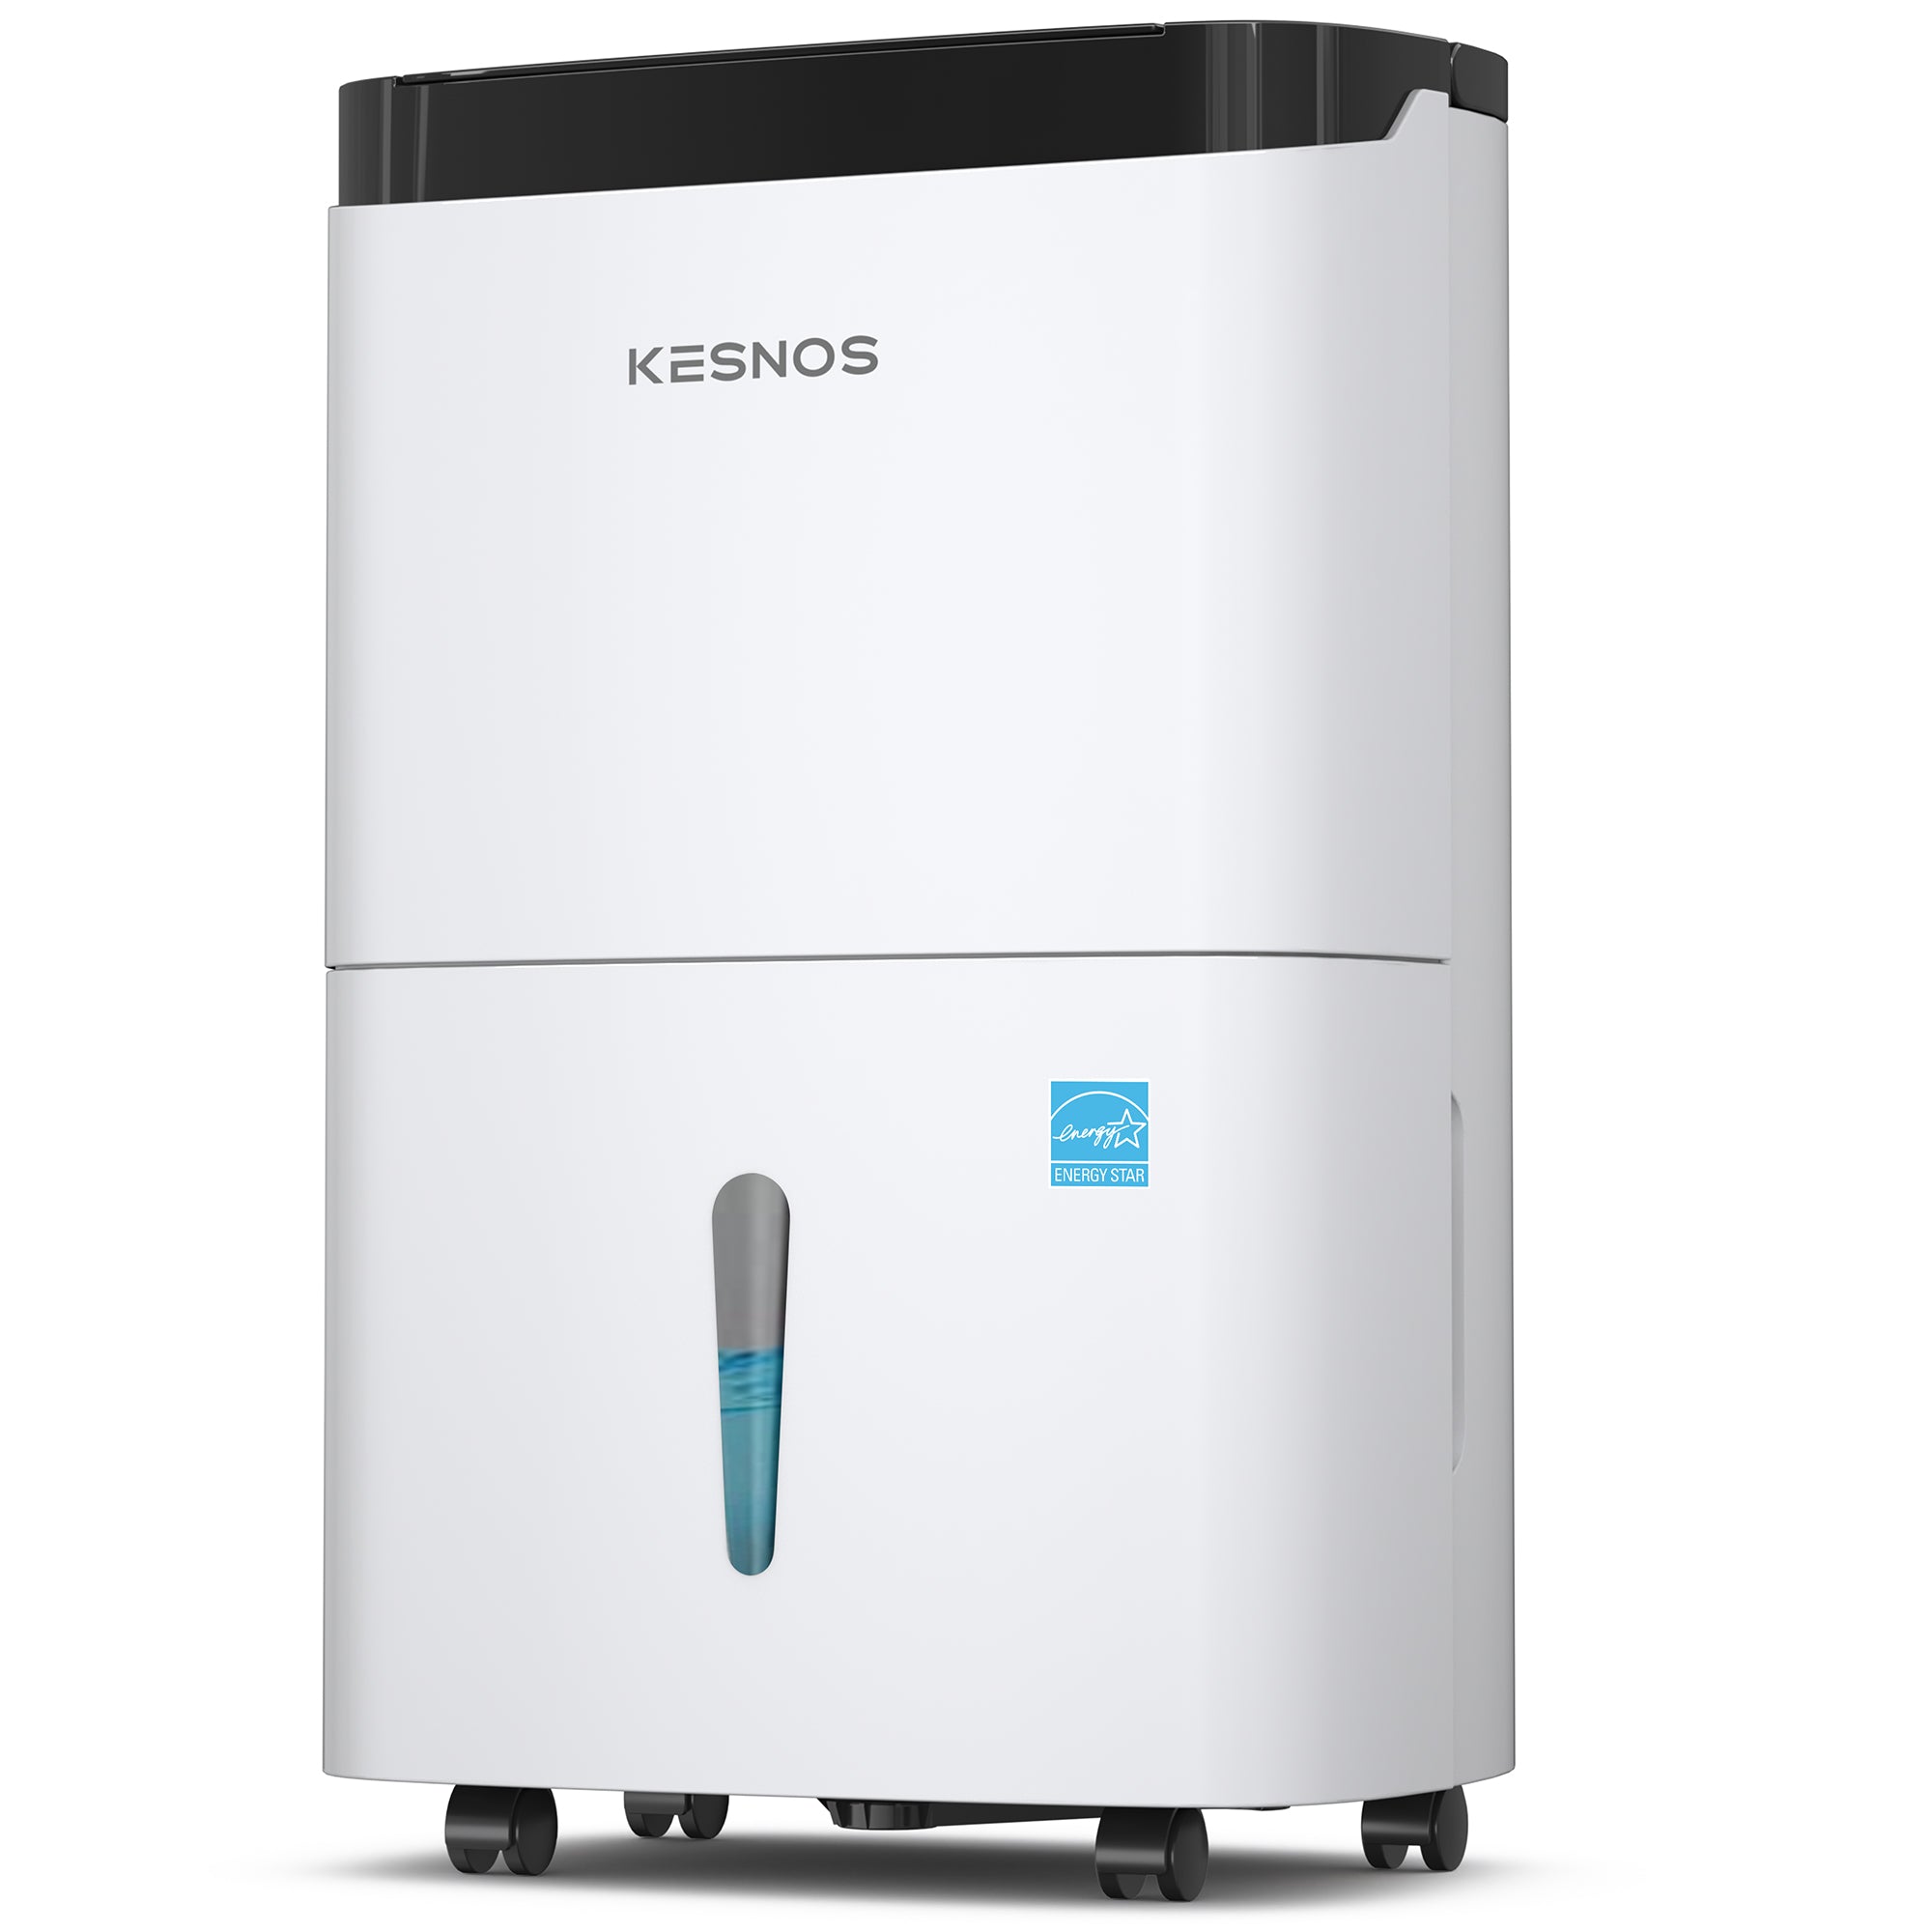 Kesnos 150 Pints Energy Star Home Dehumidifier for Space Up to 7000 Sq. Ft - Dehumidifier for Basement with Drain Hose, 1.85 Gal Water Tank, Handles, Self-Drying, Idear for Home, Large Room(Model: YDA-150)